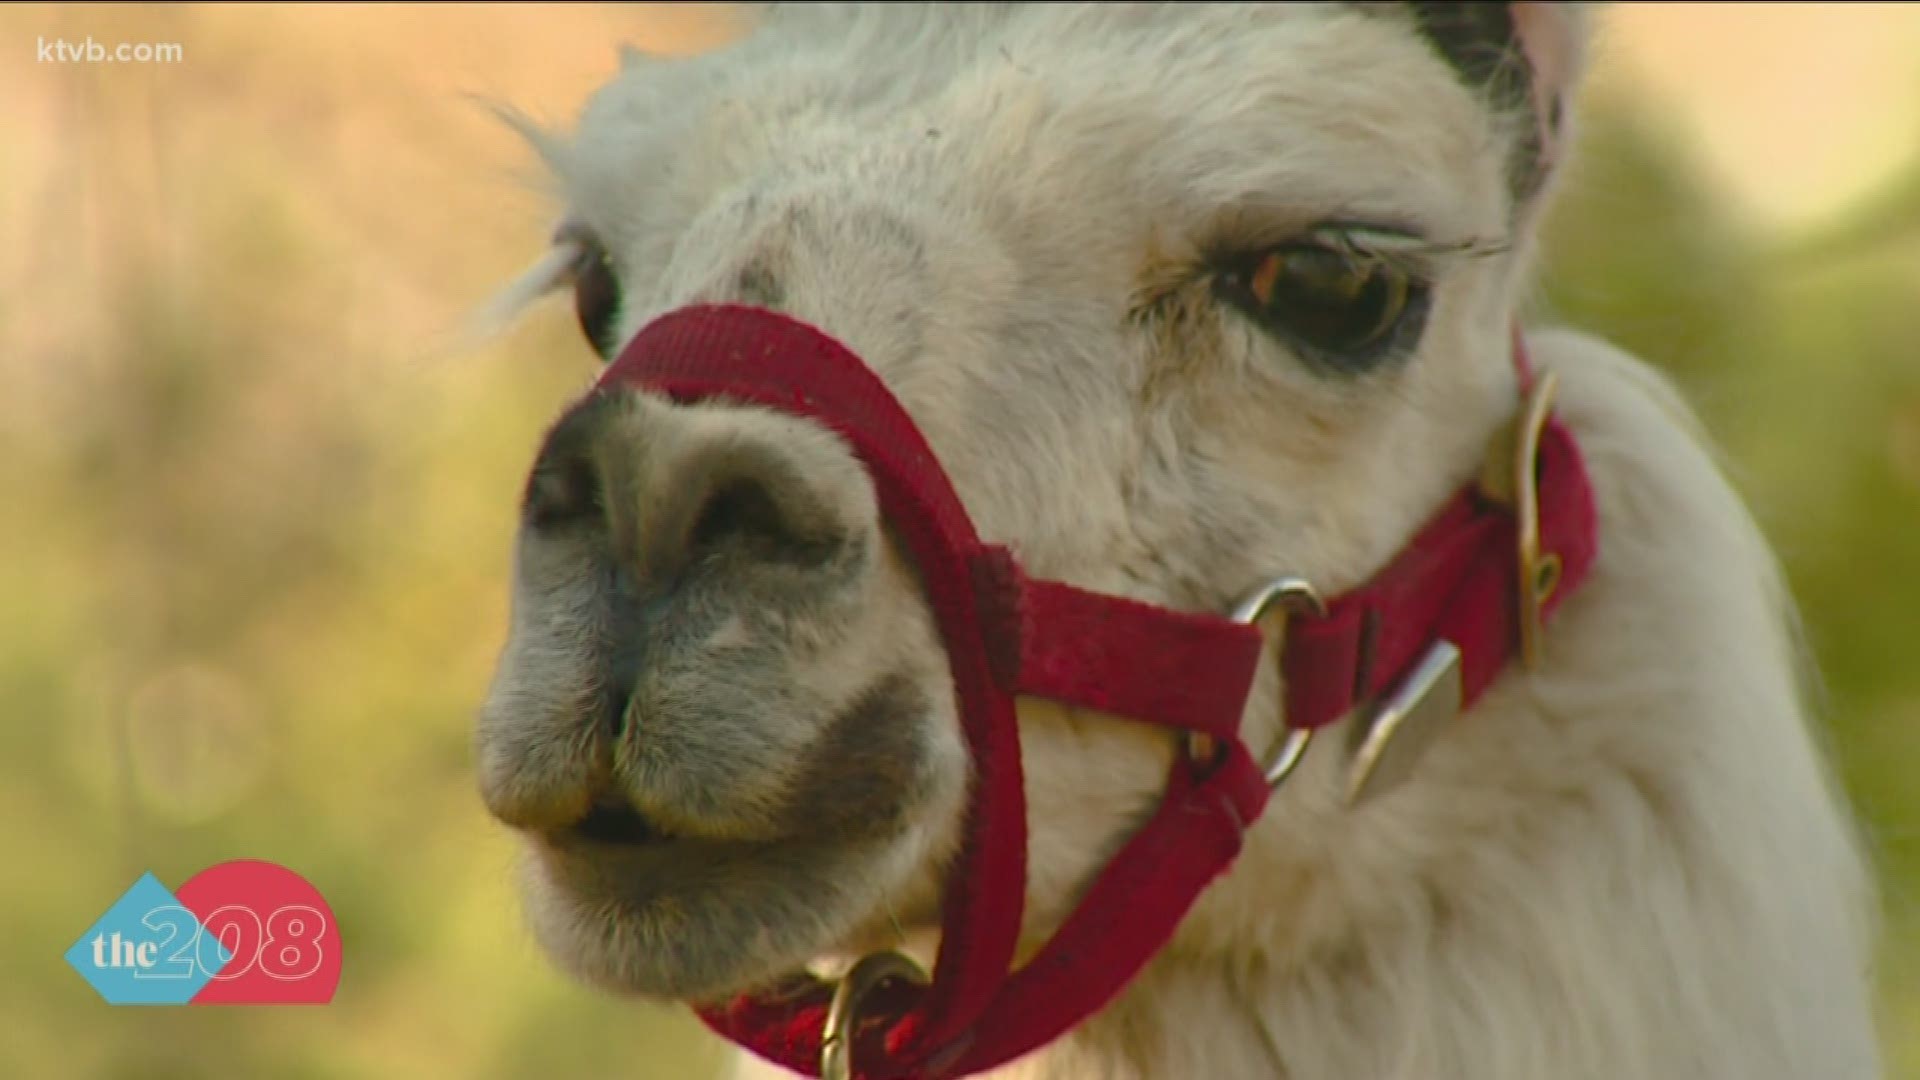 While he's pretty cute to look at, 22-year-old Dean the llama is actually helping Zoo Boise with its conservation efforts.